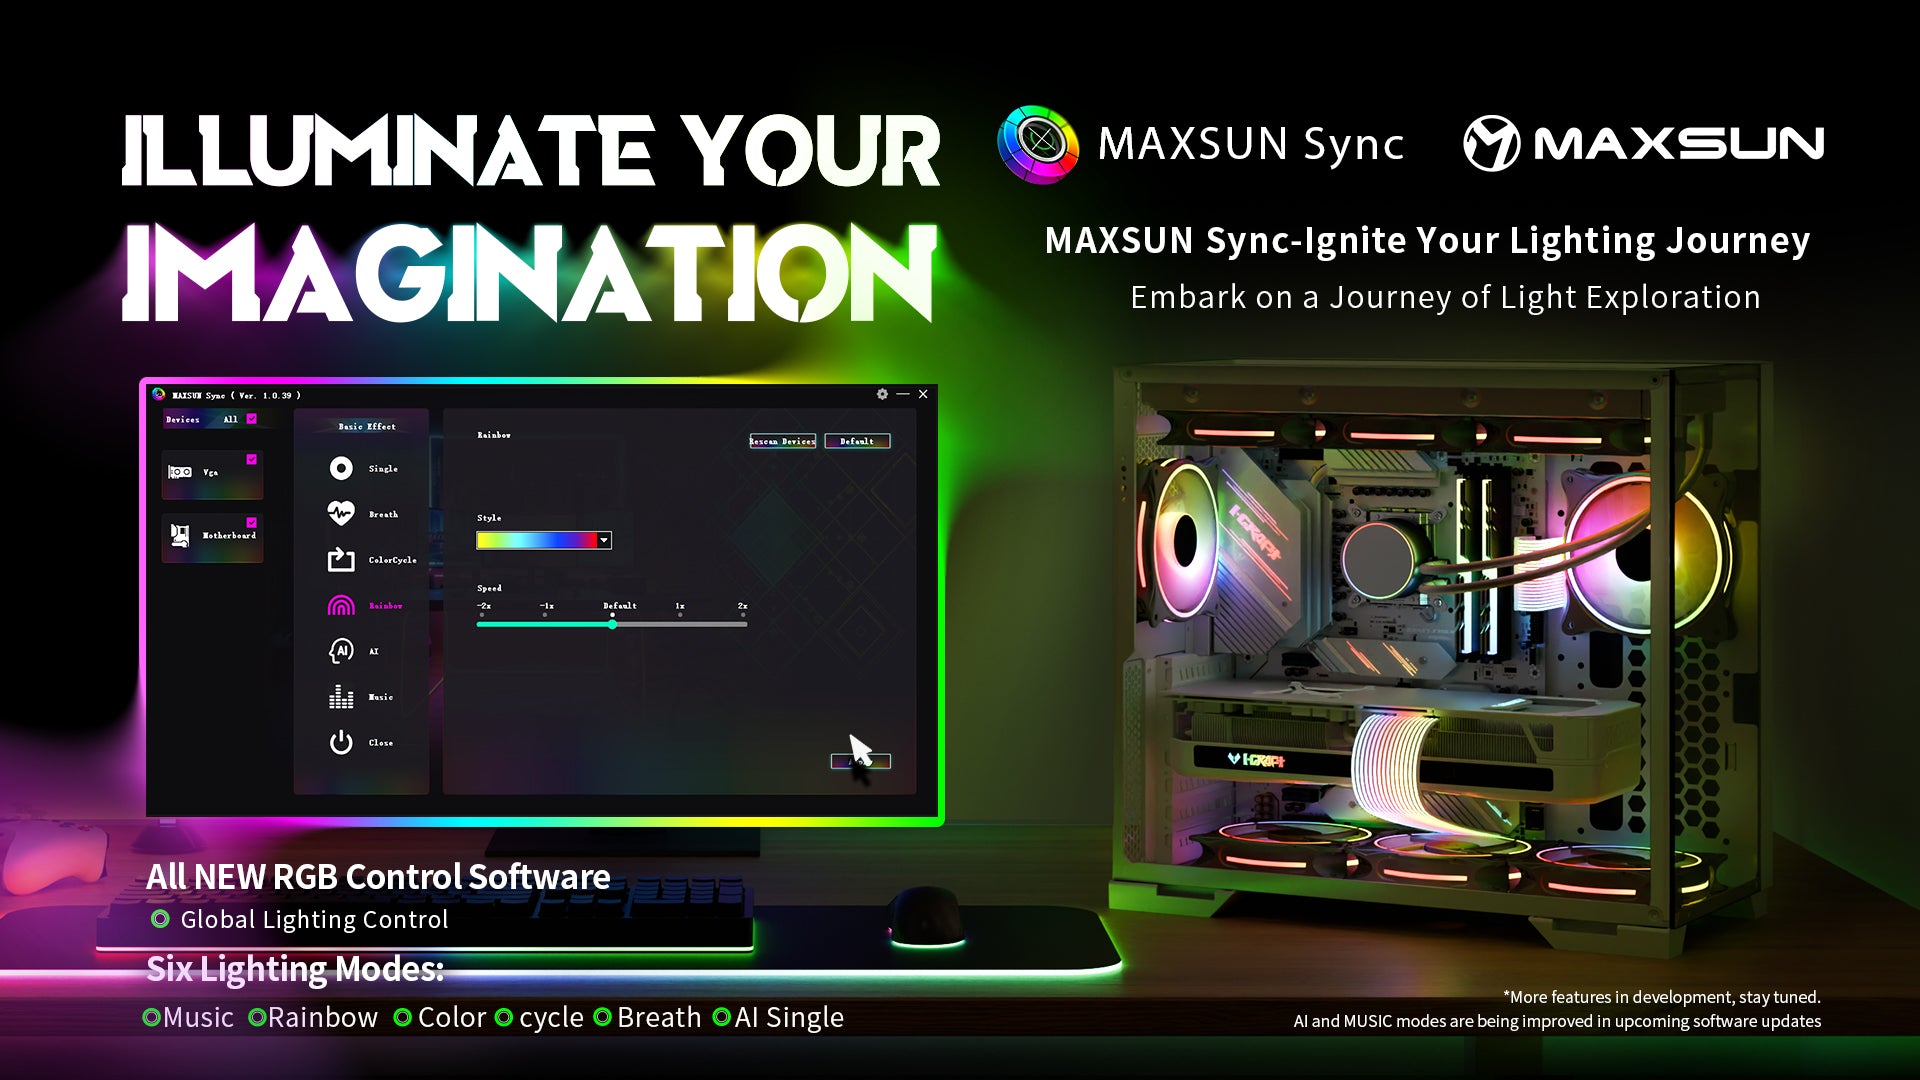 Revolutionize Your Gaming Experience with MAXSUN Sync's Advanced RGB Control